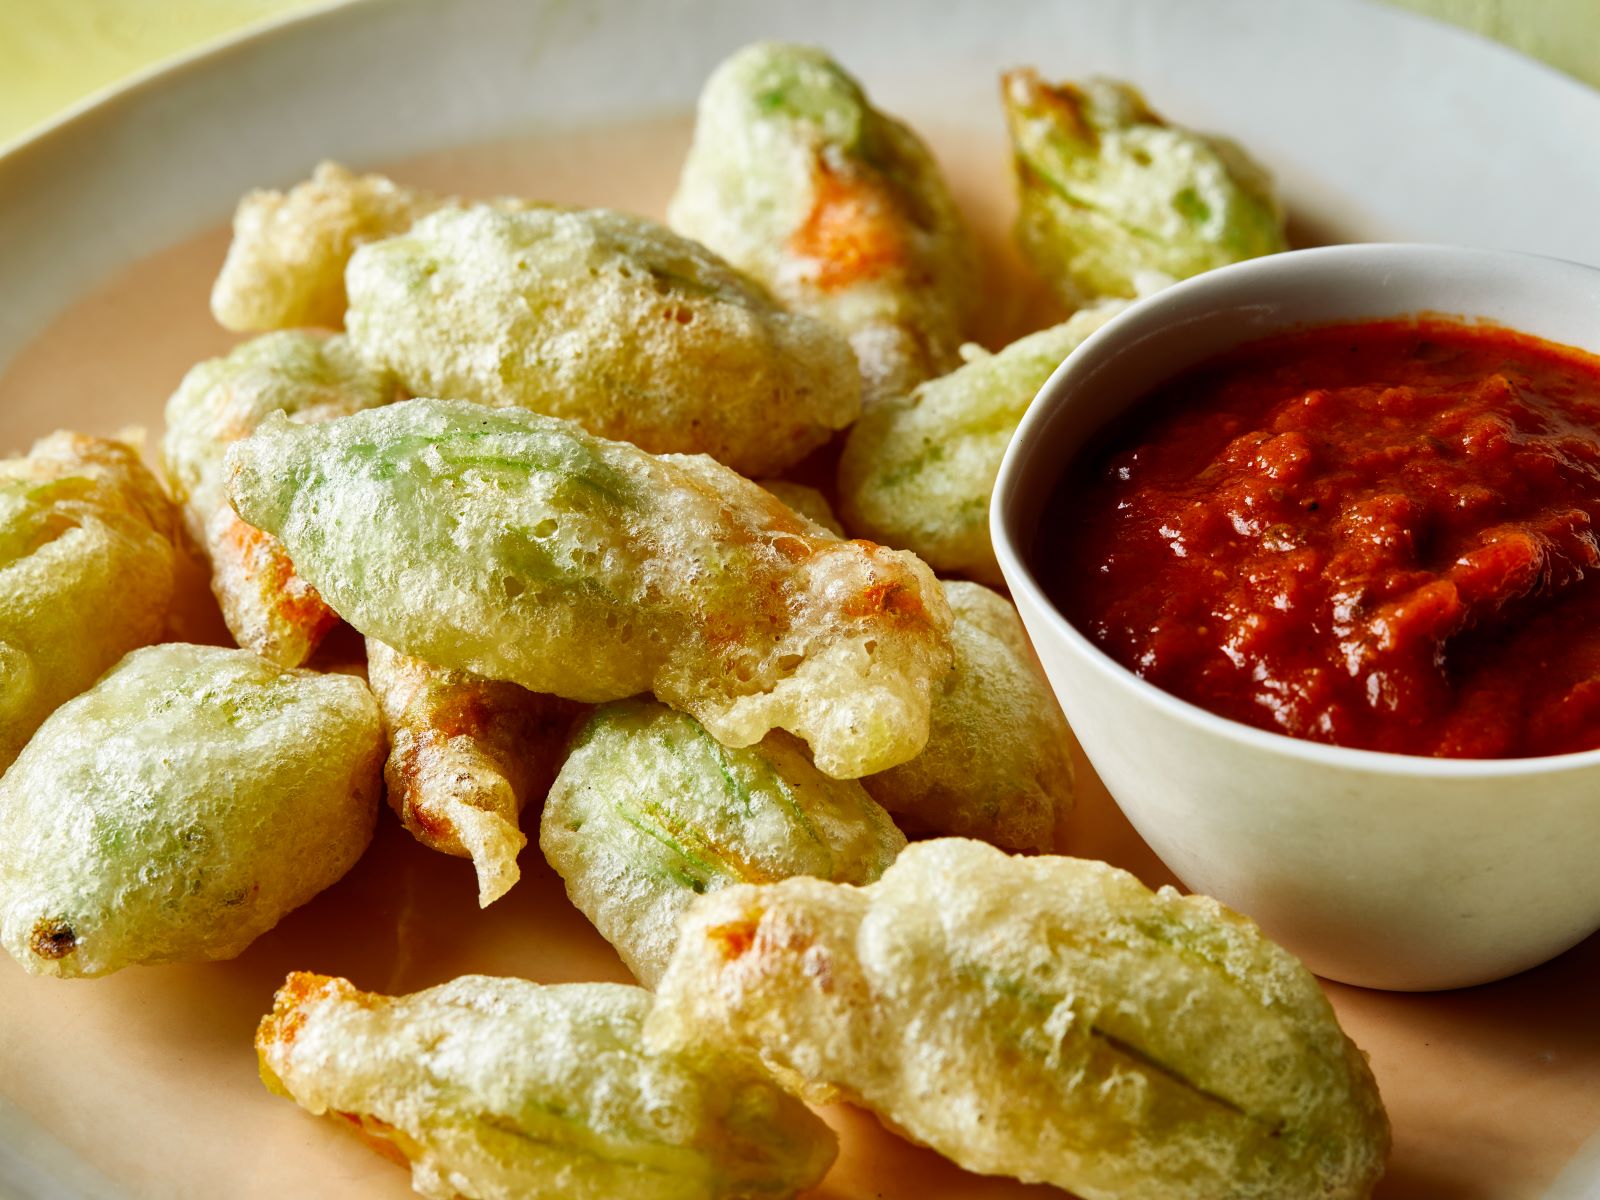 Delicious French: Stuffed Zucchini Blossoms With Shrimp